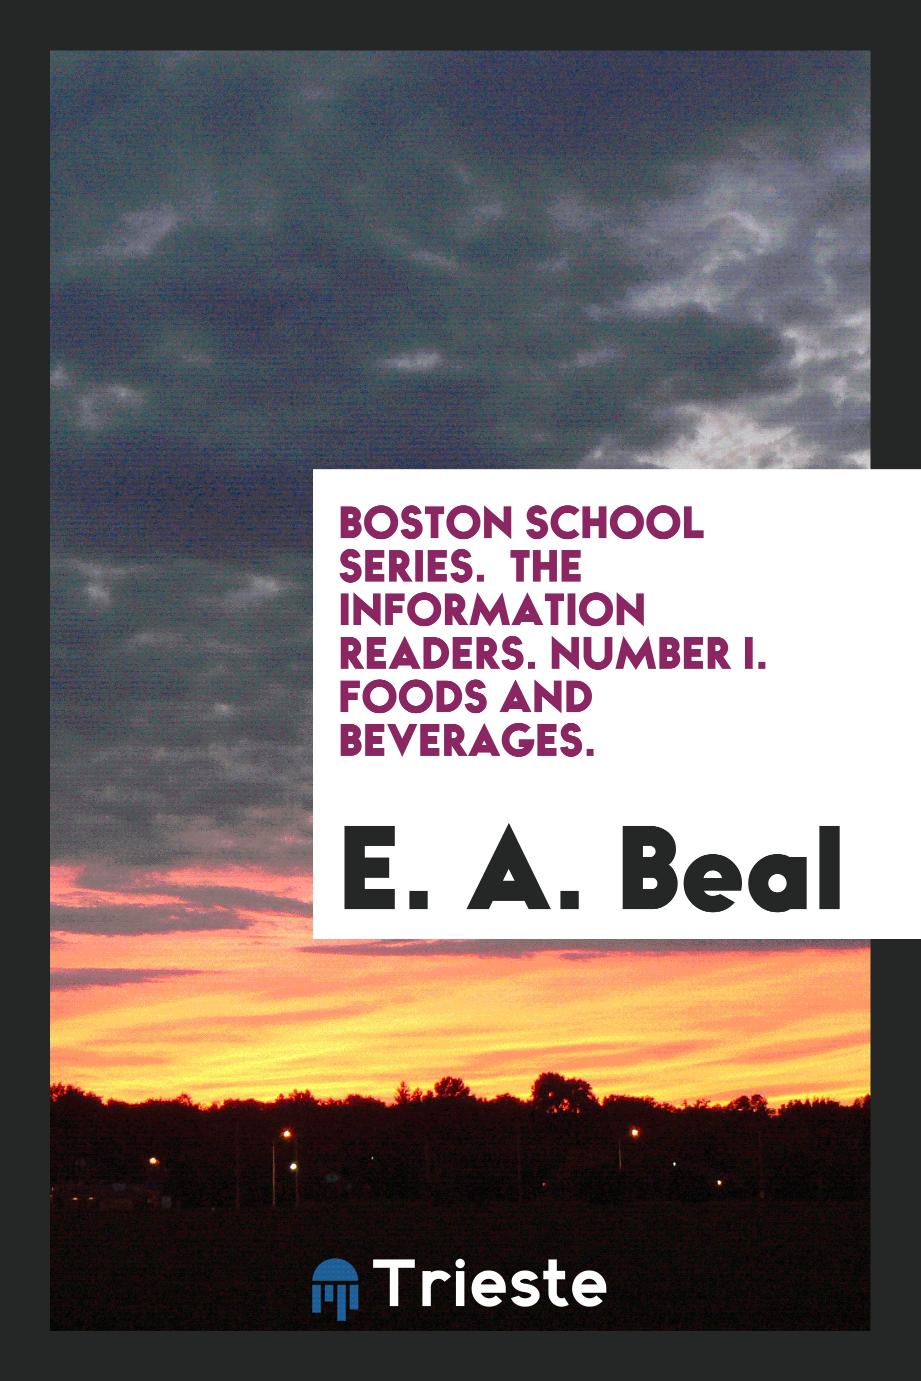 Boston school series. The information readers. Number I. Foods and beverages.